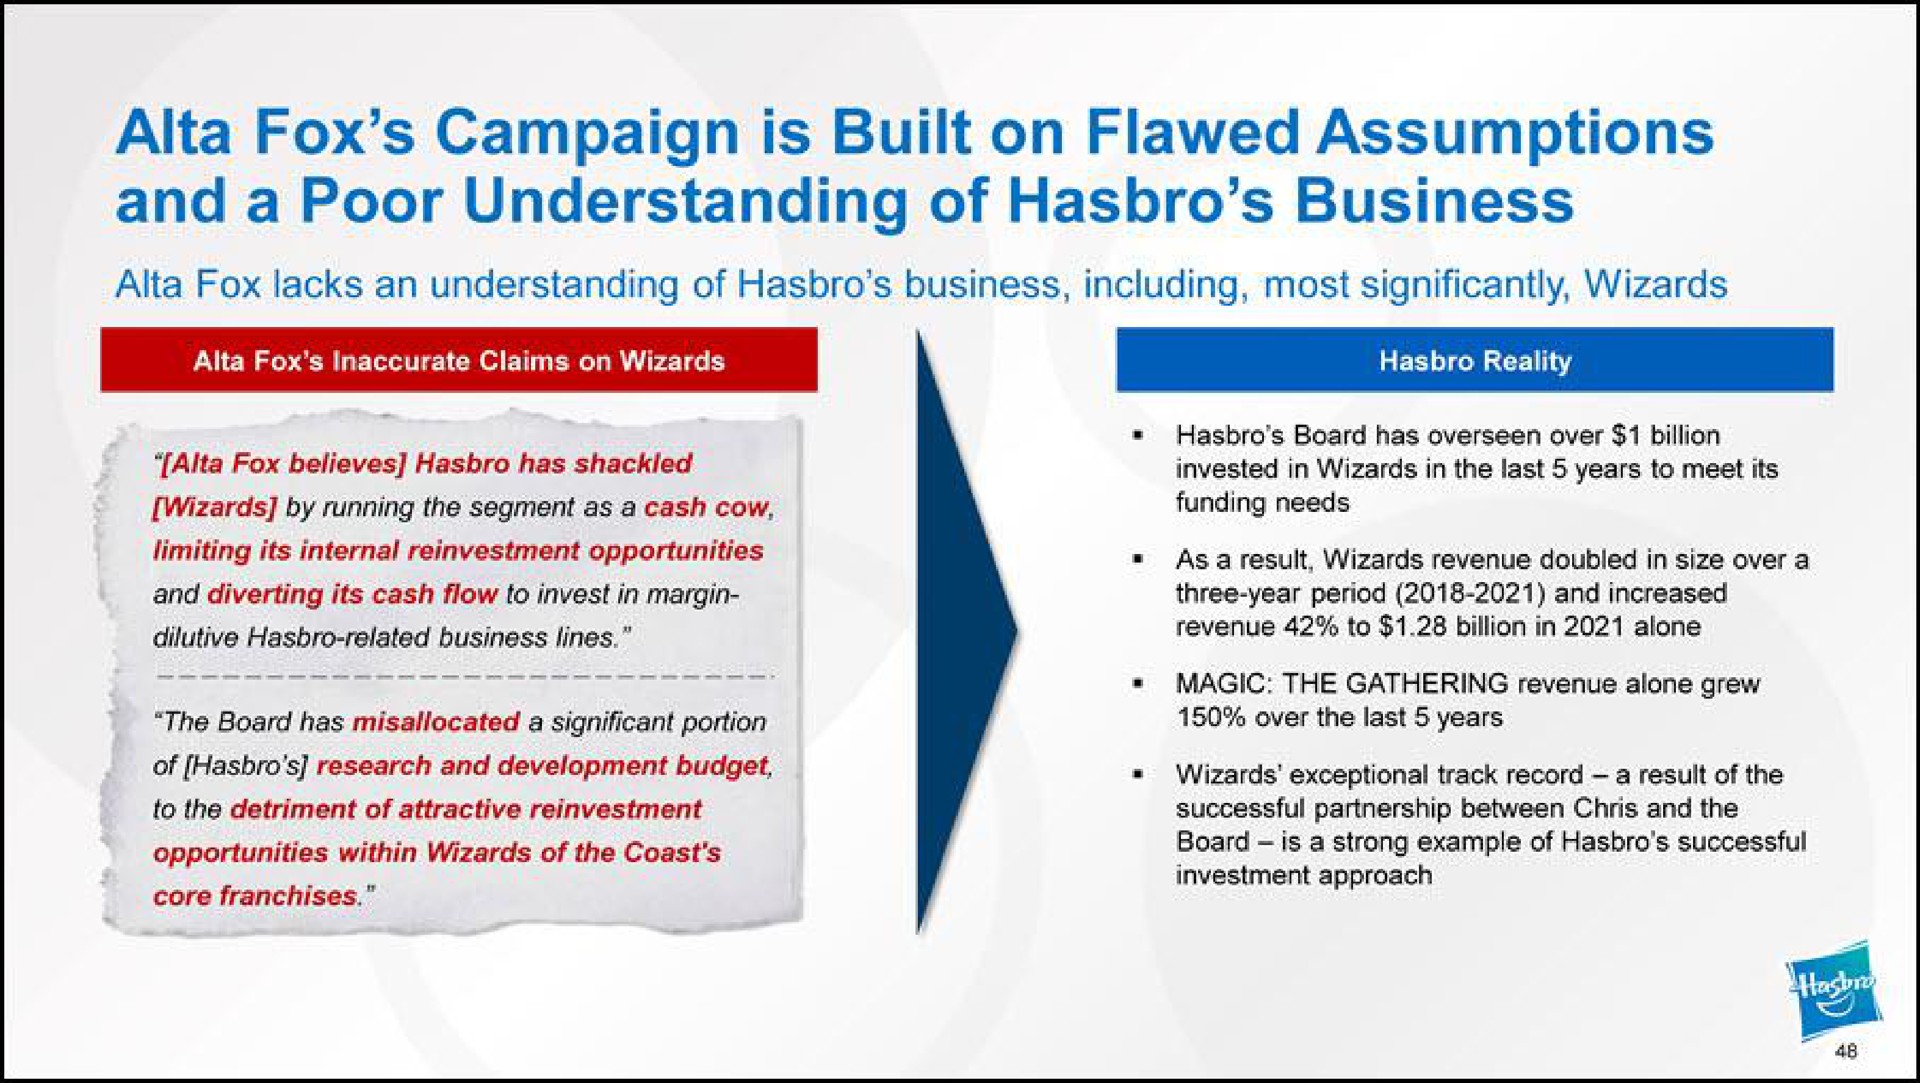 fox campaign is built on flawed assumptions and a poor understanding of business fox lacks an understanding of business including most significantly wizards limiting its internal reinvestment opportunities as a result wizards revenue doubled in size over a a wizards exceptional track record a result of the of research and development budget | Hasbro